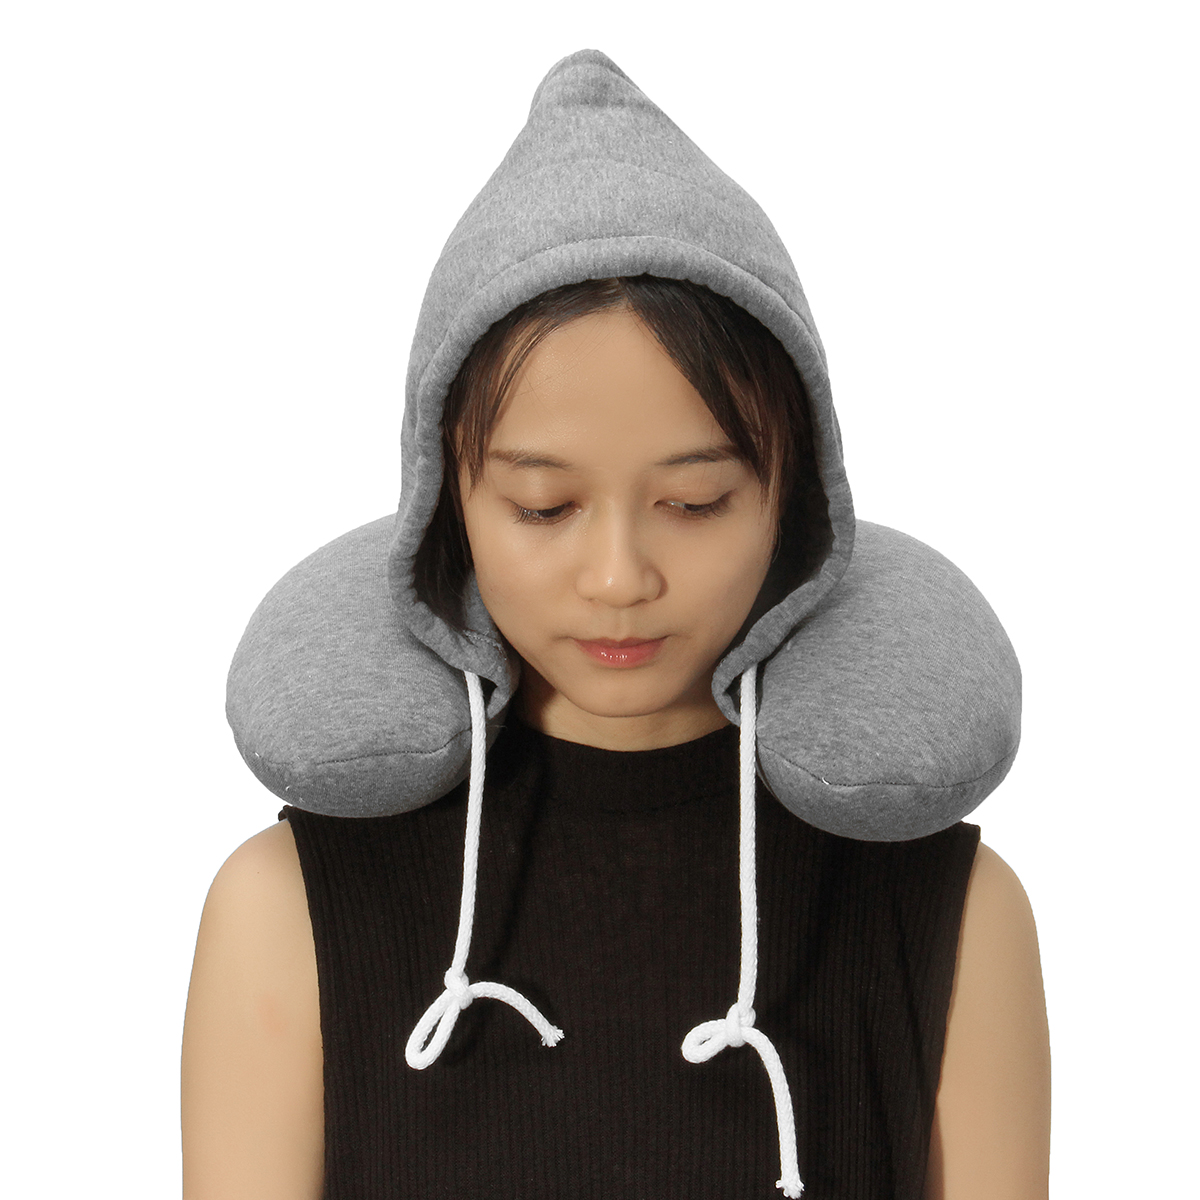 U-Shaped-Hooded-Pillow-Cushion-Winter-Warm-Hat-Rest-Neck-Support-Winter-Warm-1243401-4